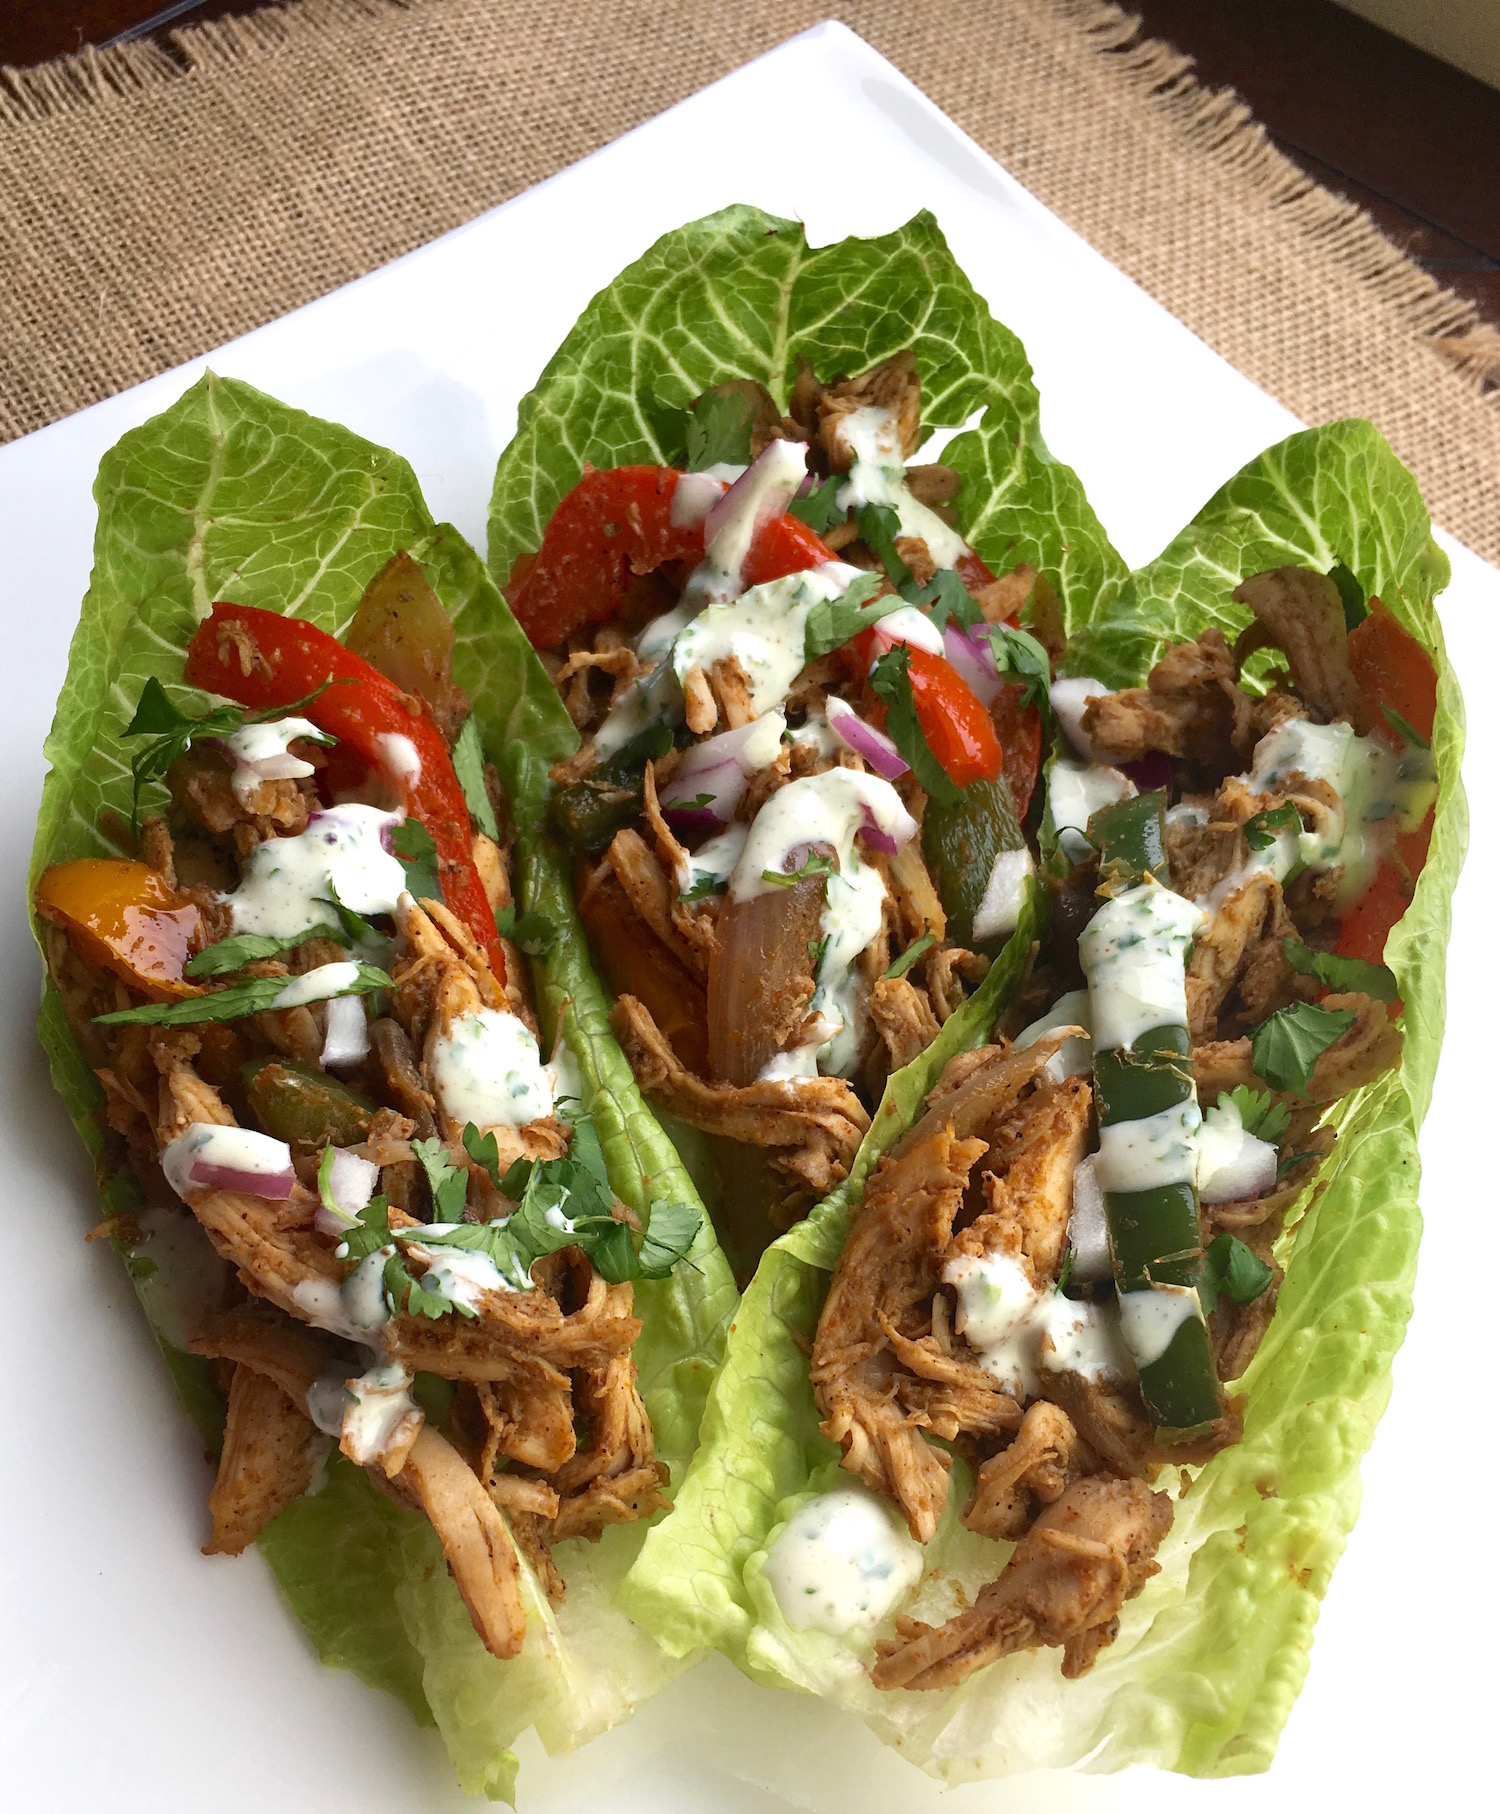 These Healthy Chicken Fajita Lettuce Wraps come together in quickly thanks to rotisserie shredded chicken. With minimal time at the stove, you can prepare a tasty meal in under 30 minutes.